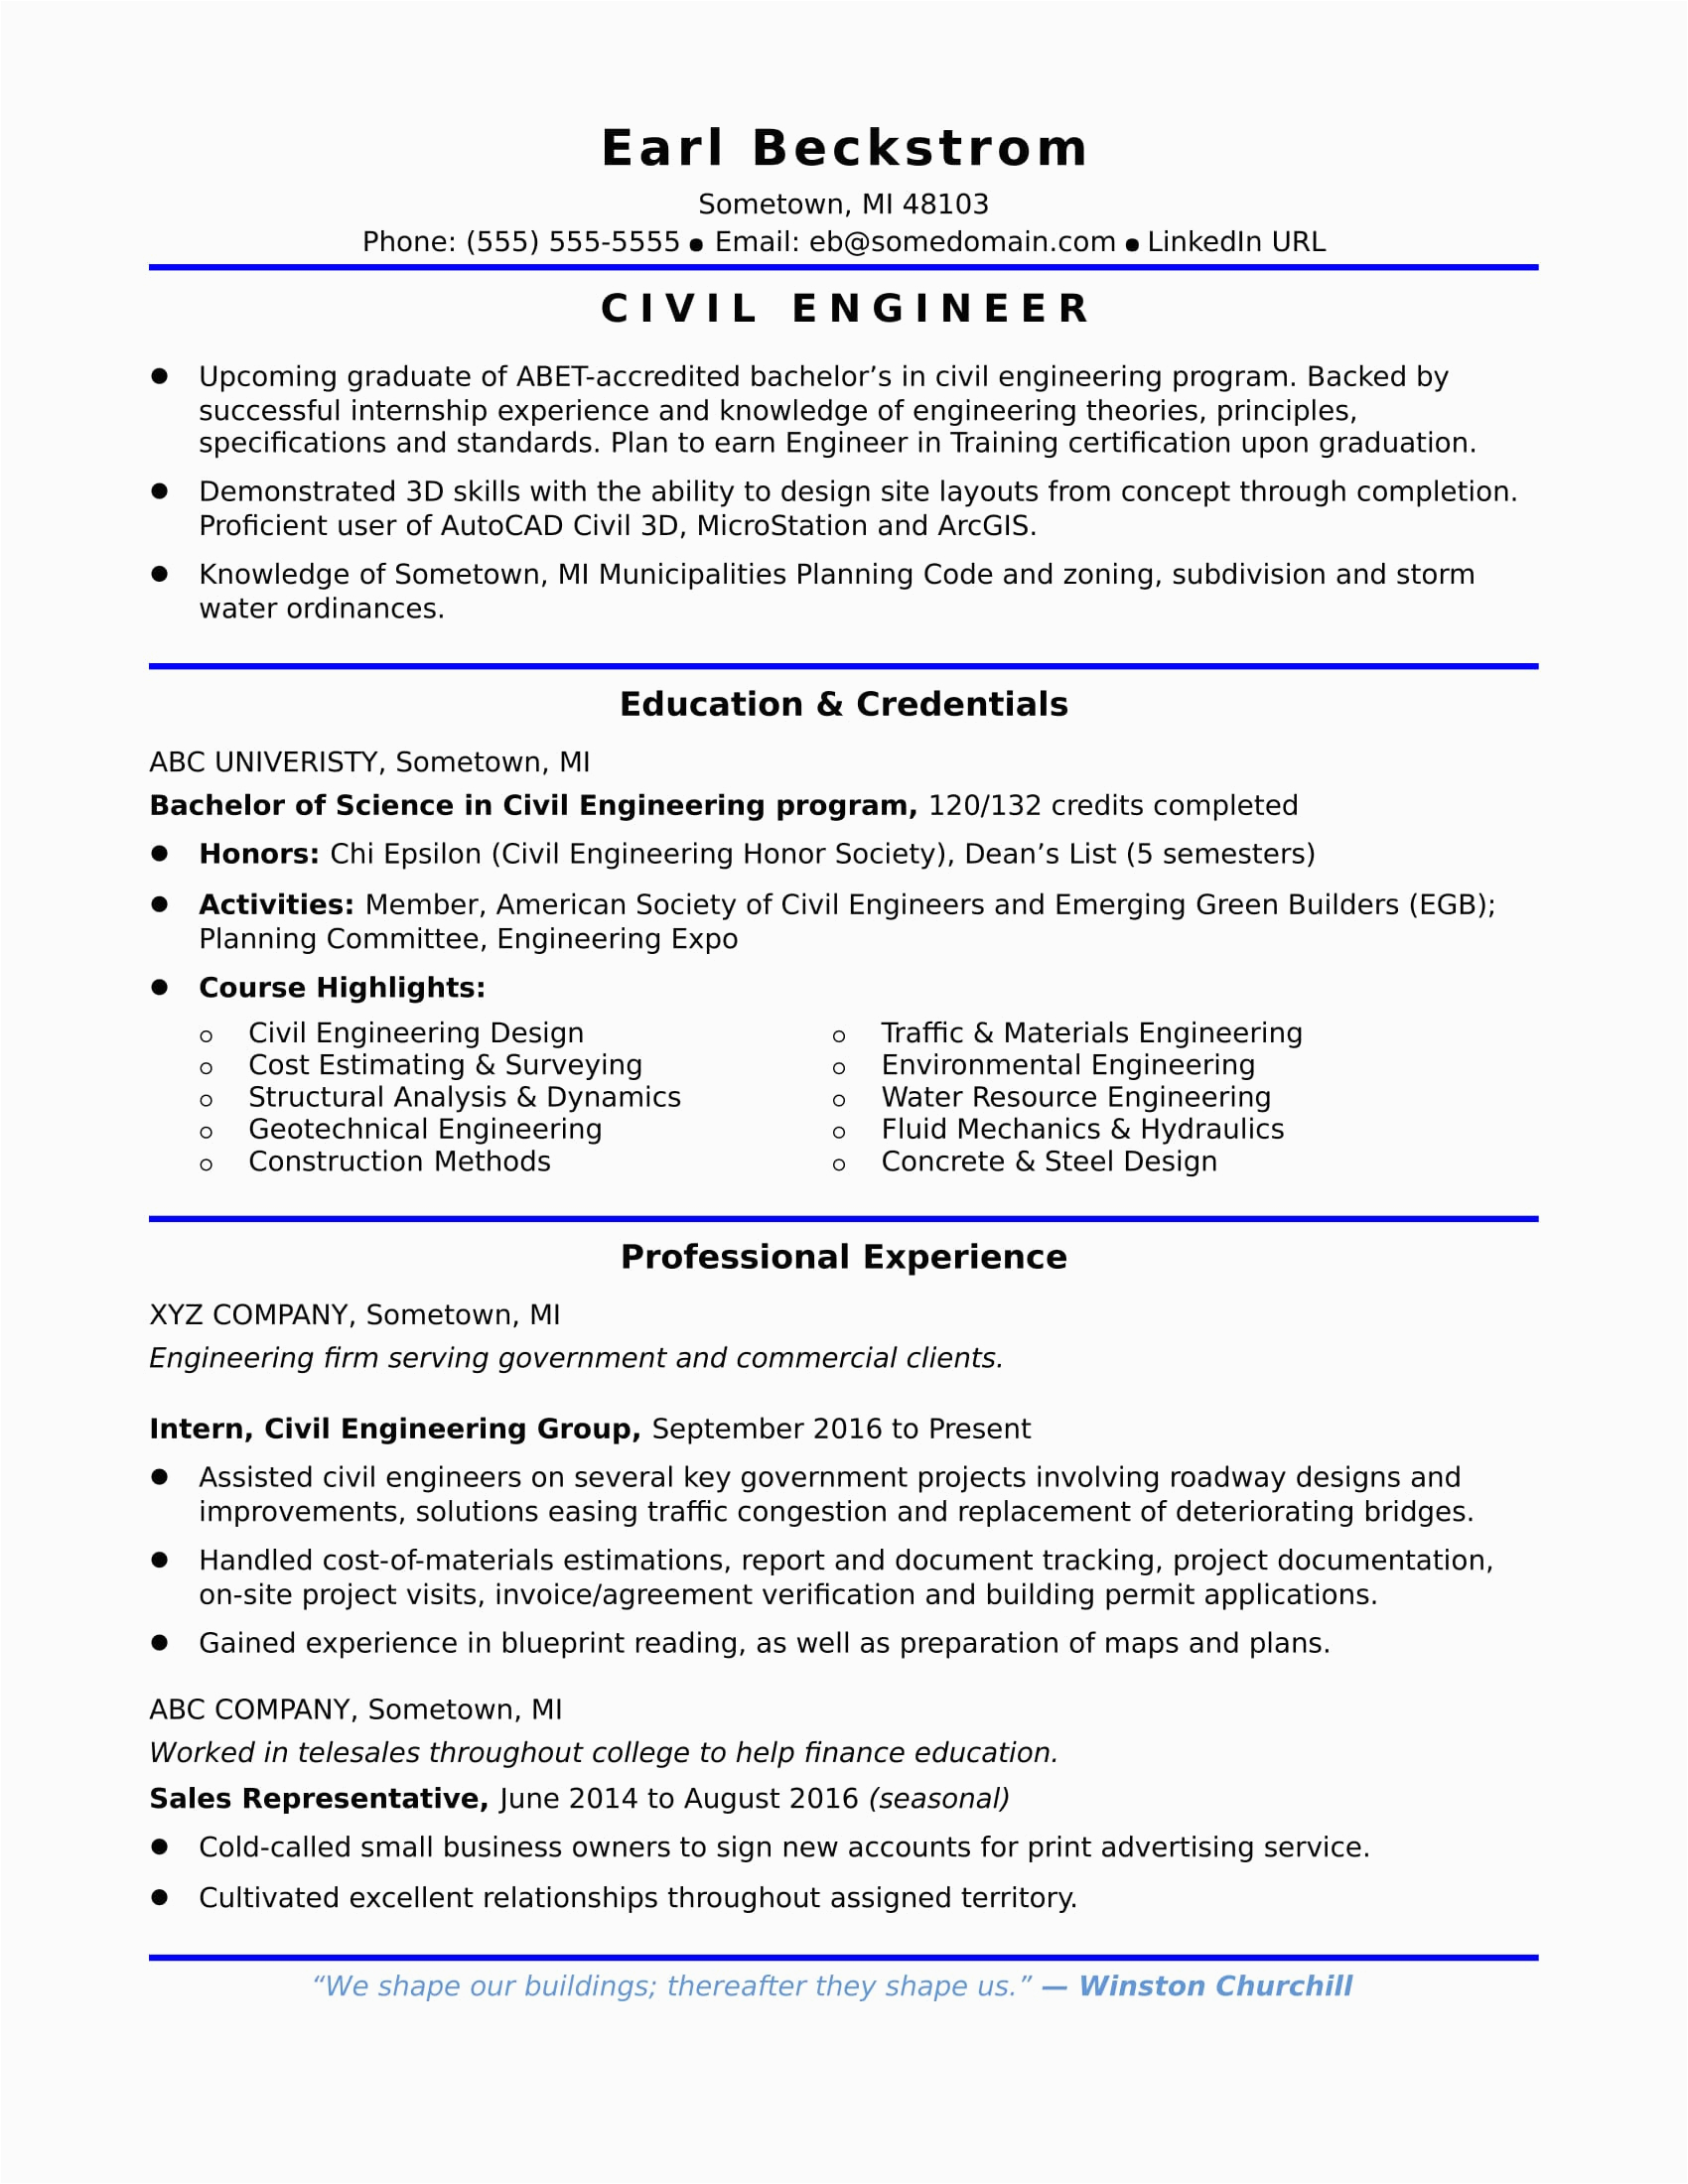 Sample Resume for Civil Engineer Fresh Graduate In Philippines Resume Samples for Civil Engineer In the Philippines